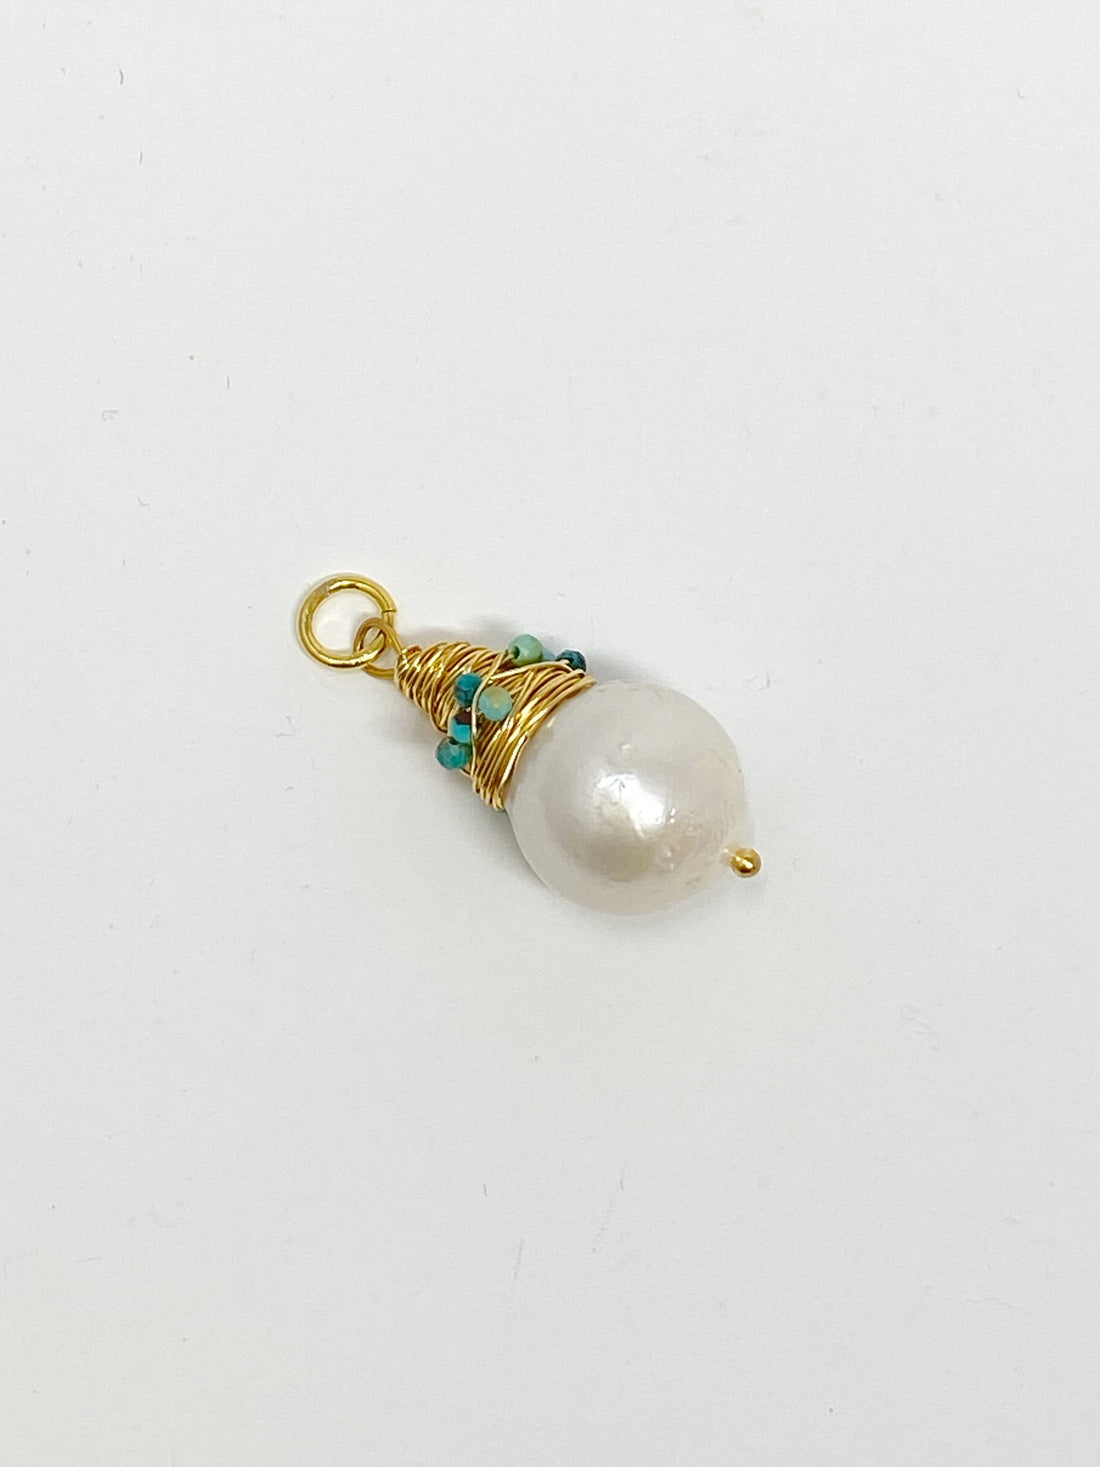 Charming Pearl Charm with Wrapped Gold and Turquoise Setting